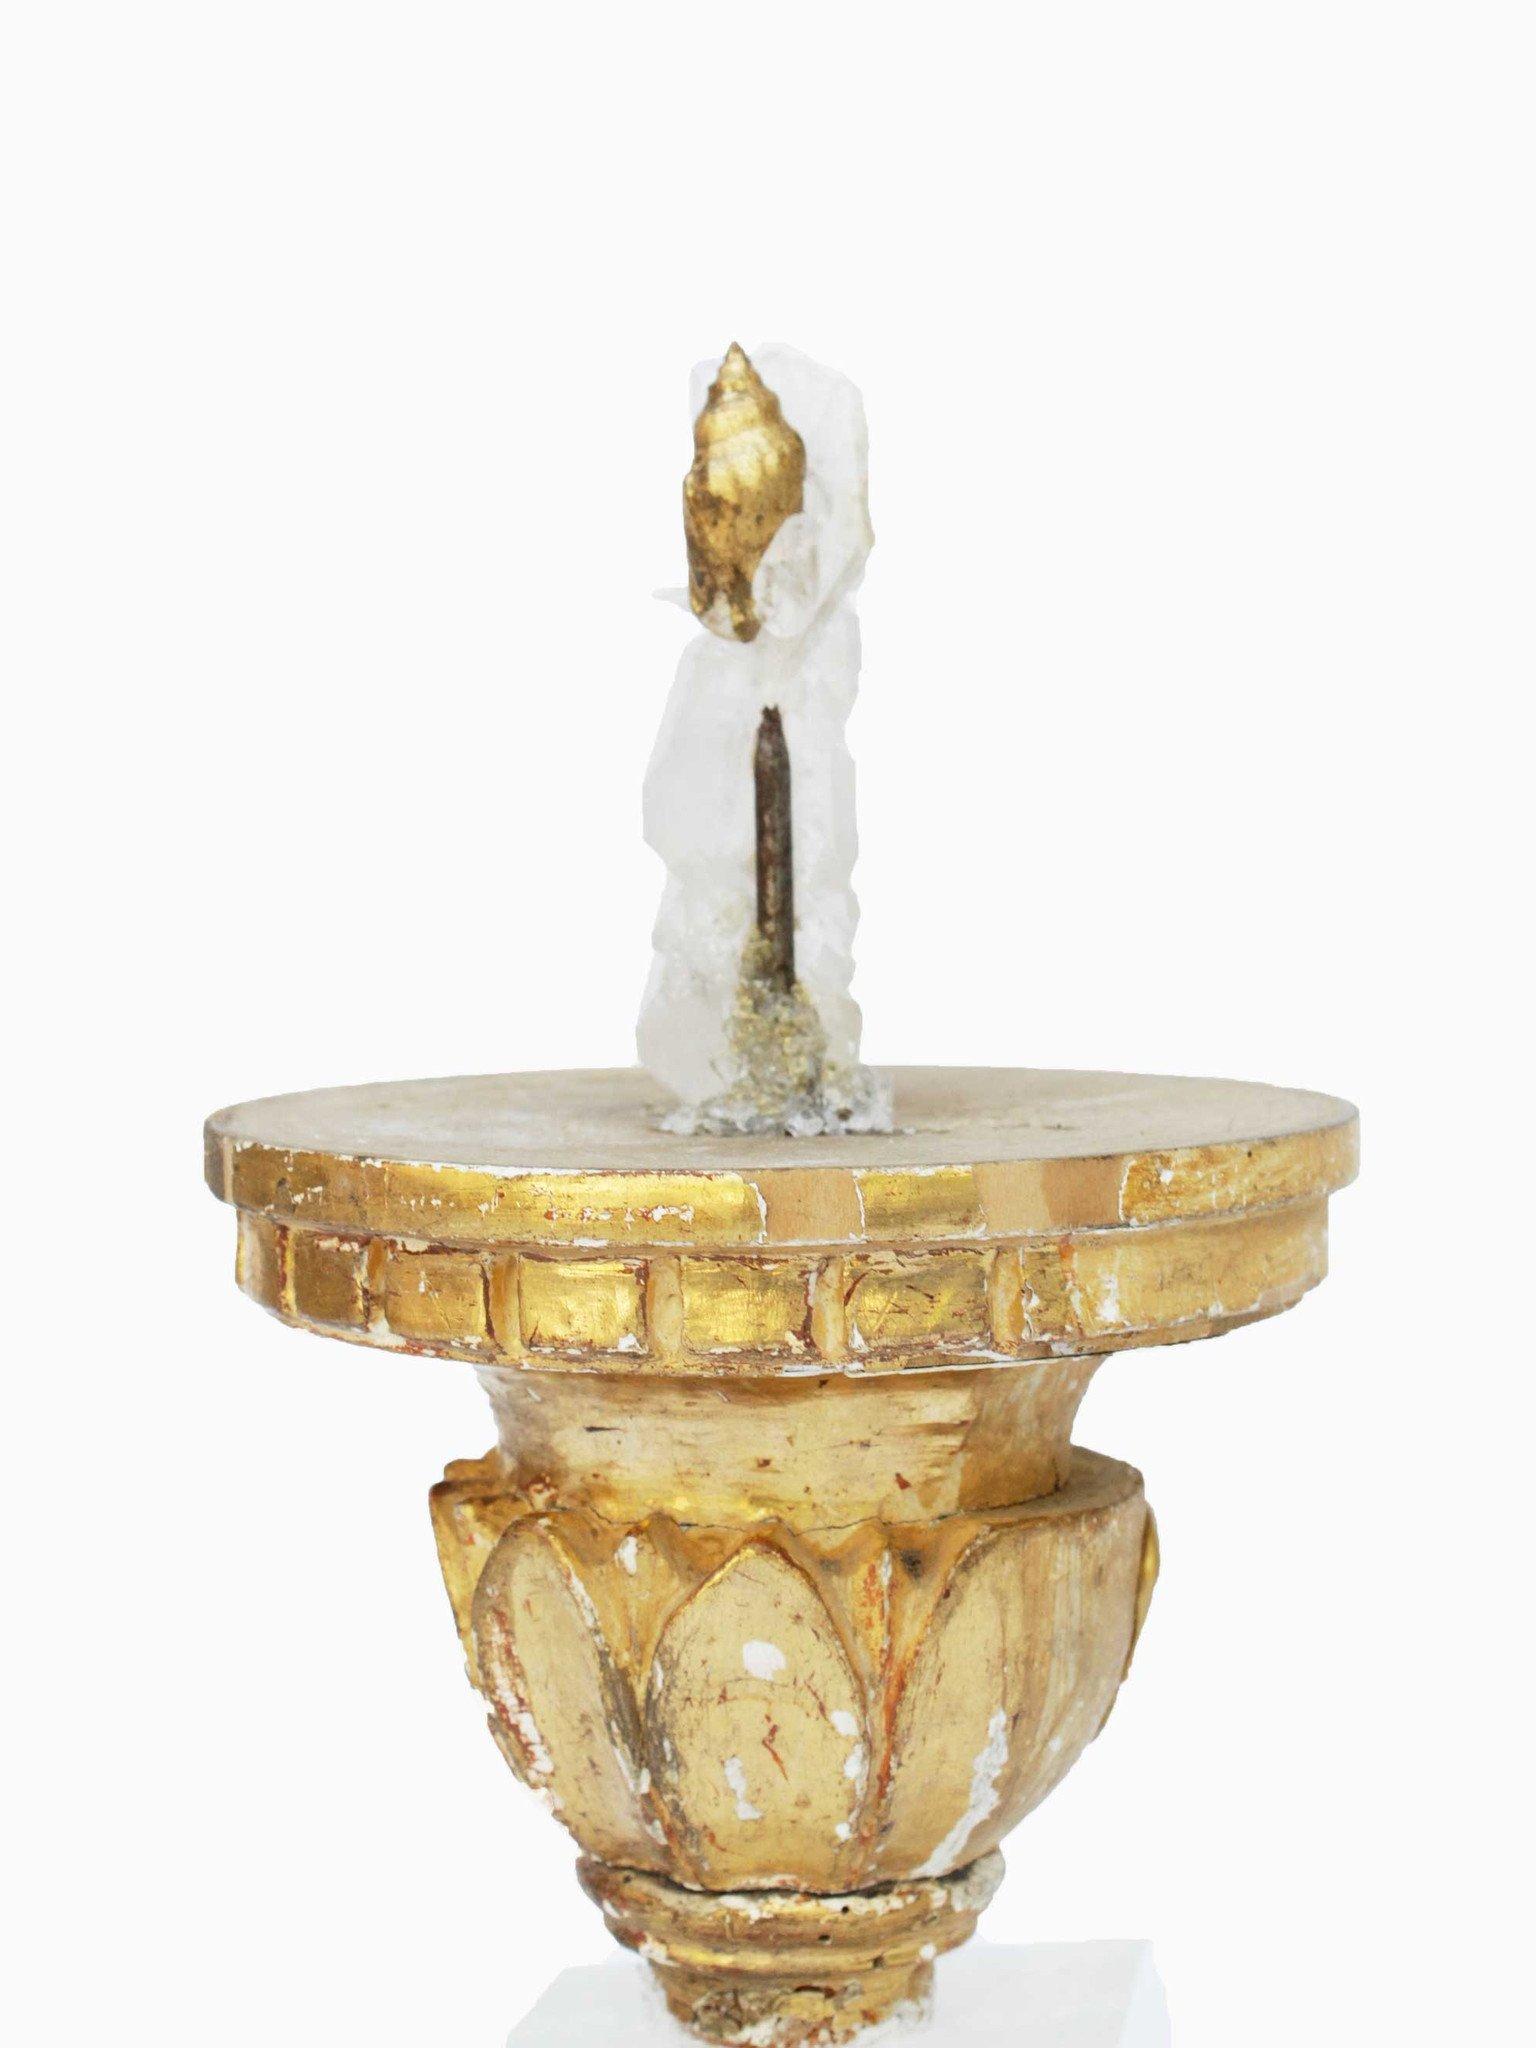 18th century Italian gold leaf candlestick with faden crystal and a gold leaf shell on an optical calcite base. 

The candlestick is originally from Tuscany. It is joined together with the faden crystal, gold leaf shell, and optical calcite base